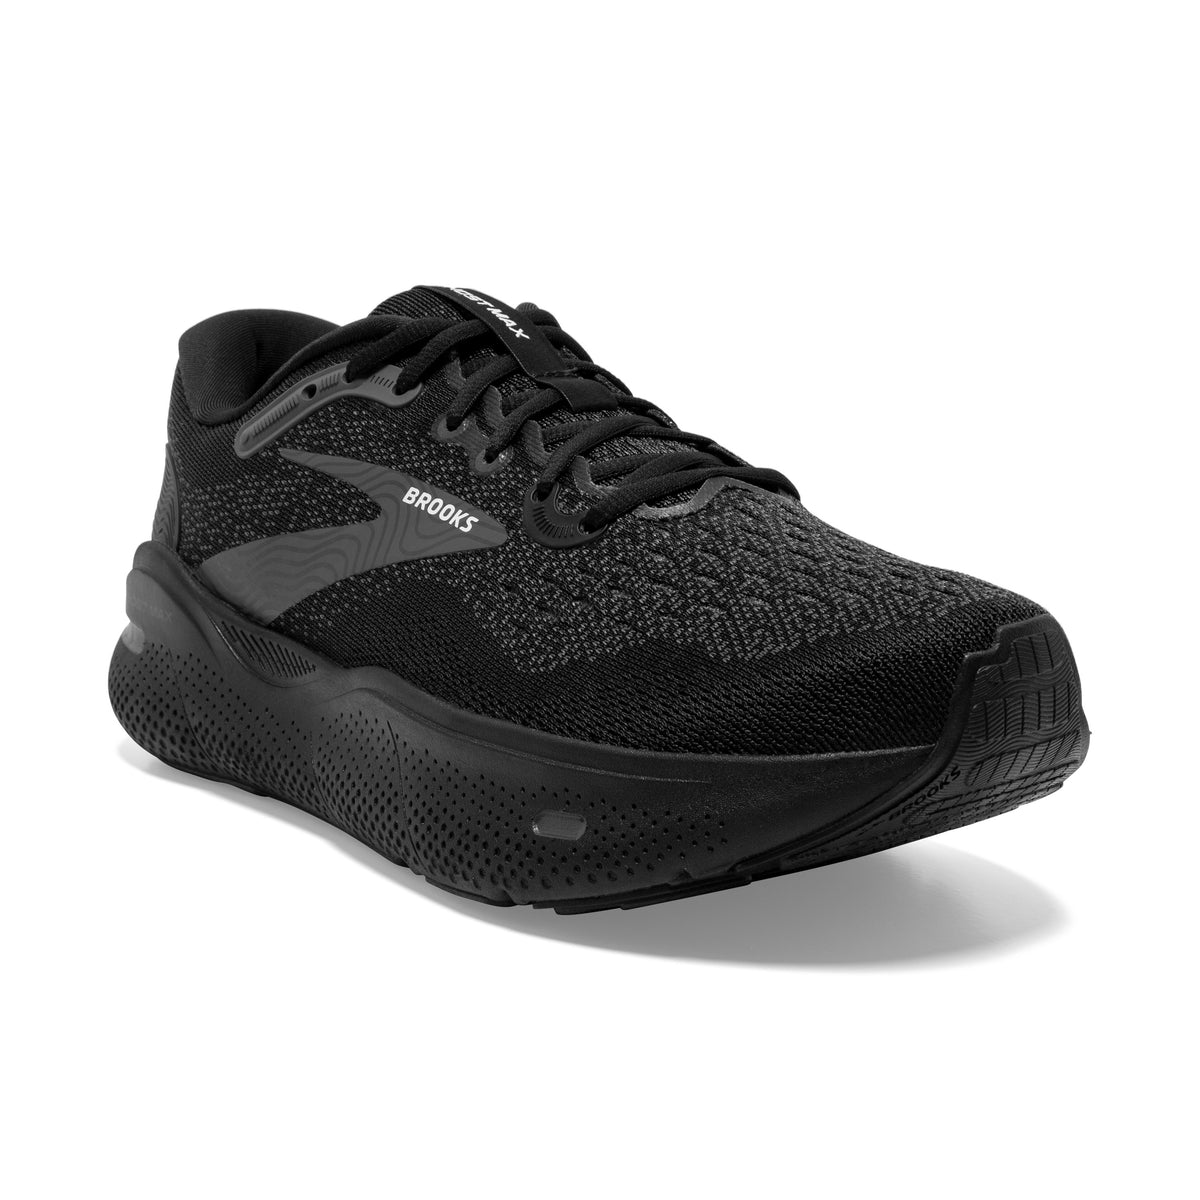 Ghost Max Men's Running Shoes